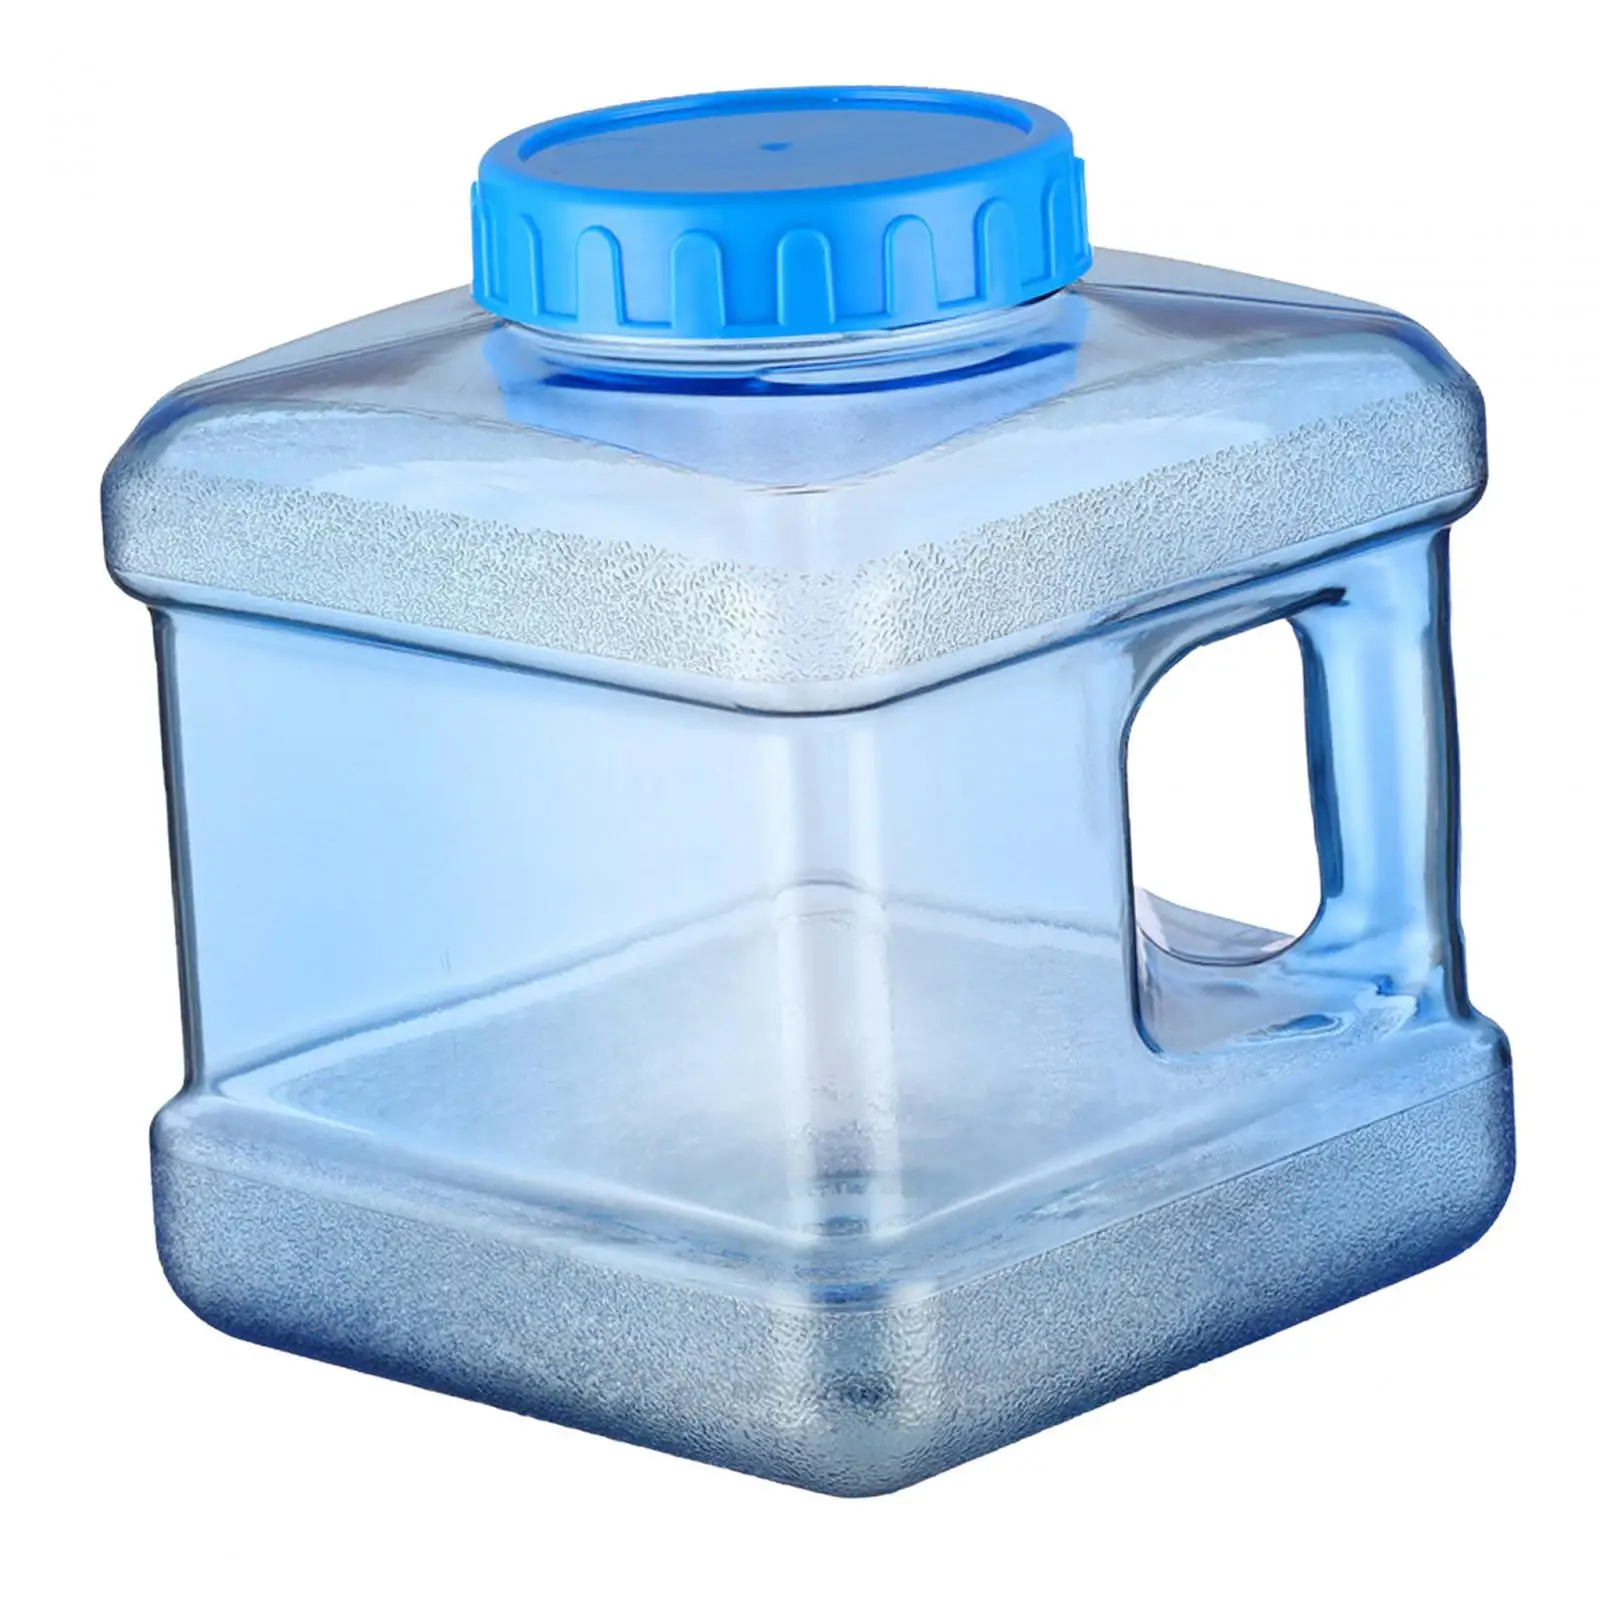 Camping Water Storage Jug Water Bucket Water Container Water Bottle Carrier for Bathing Cars